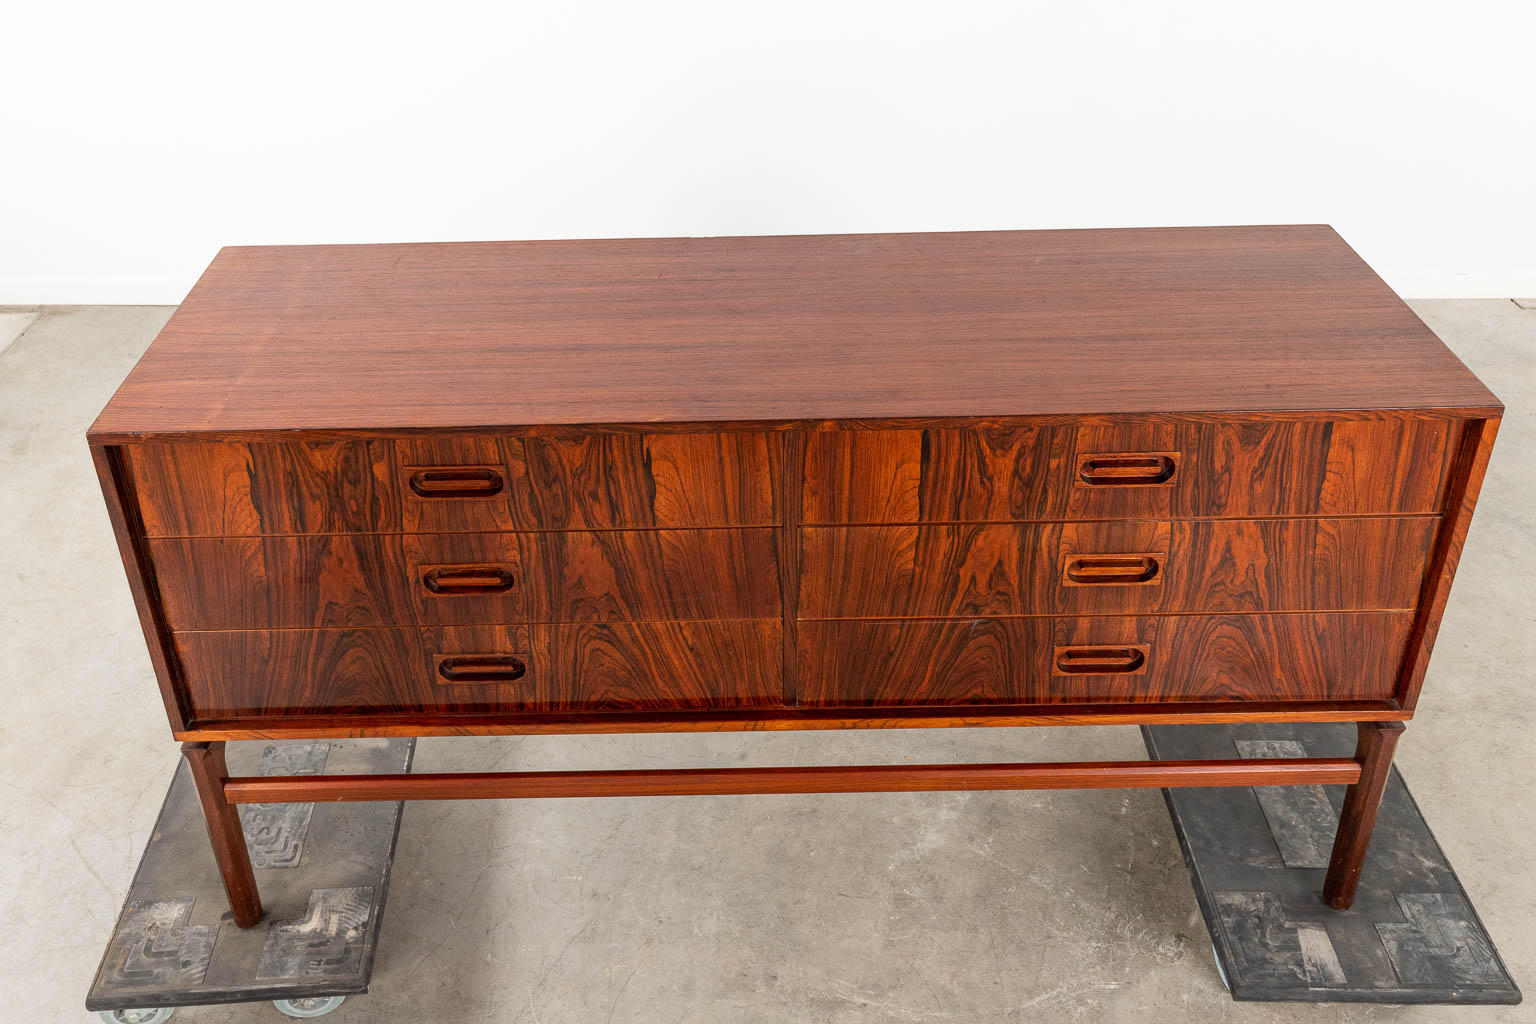 A mid-century Scandinavian Sideboard with 6 drawers, and rosewood veneer. (D:45 x W:150 x H:80 cm)